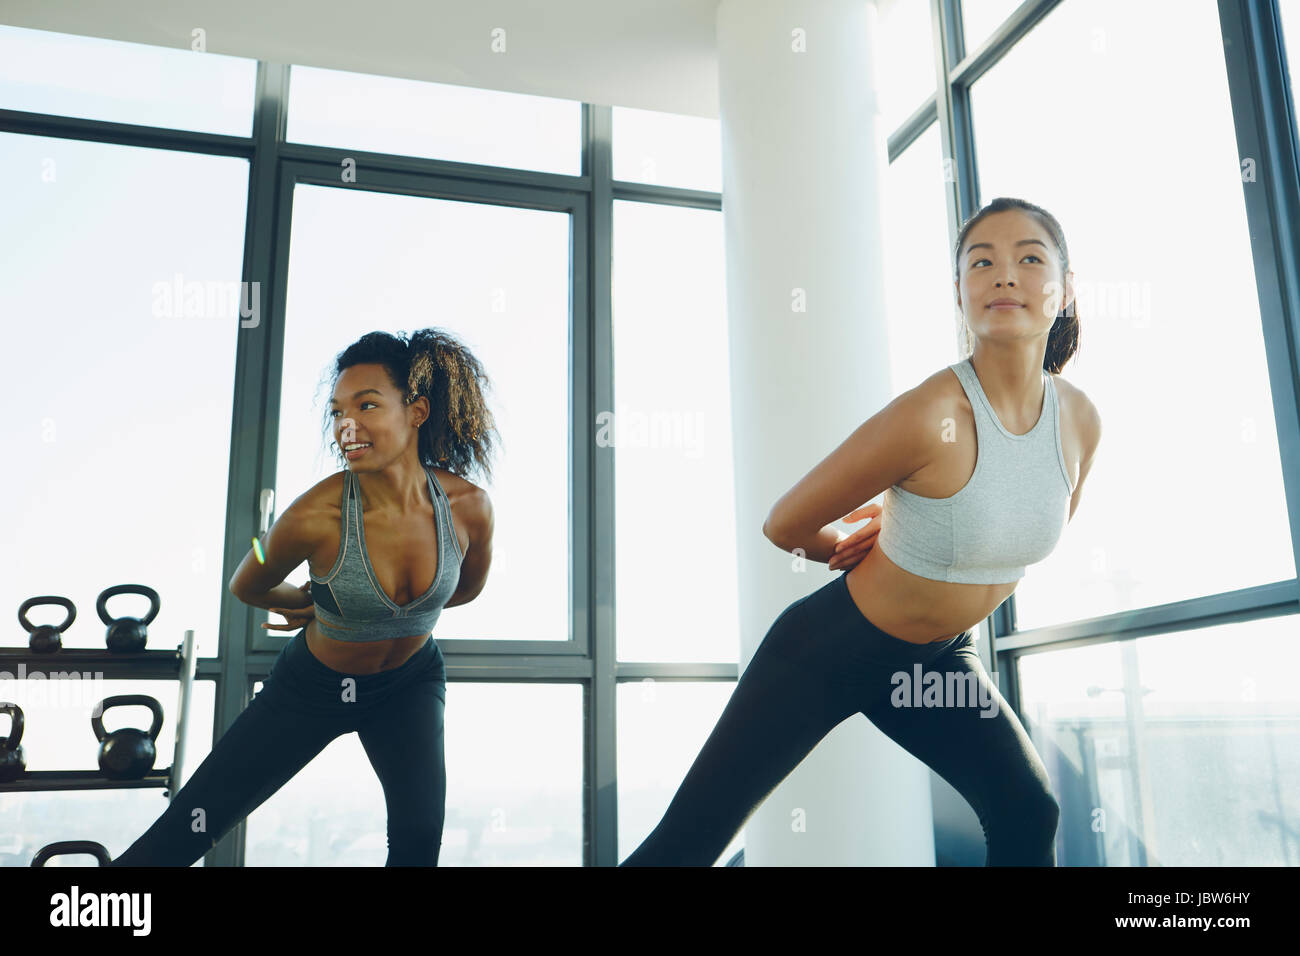 Two young women exercising in gym, doing aerobic workout Stock Photo